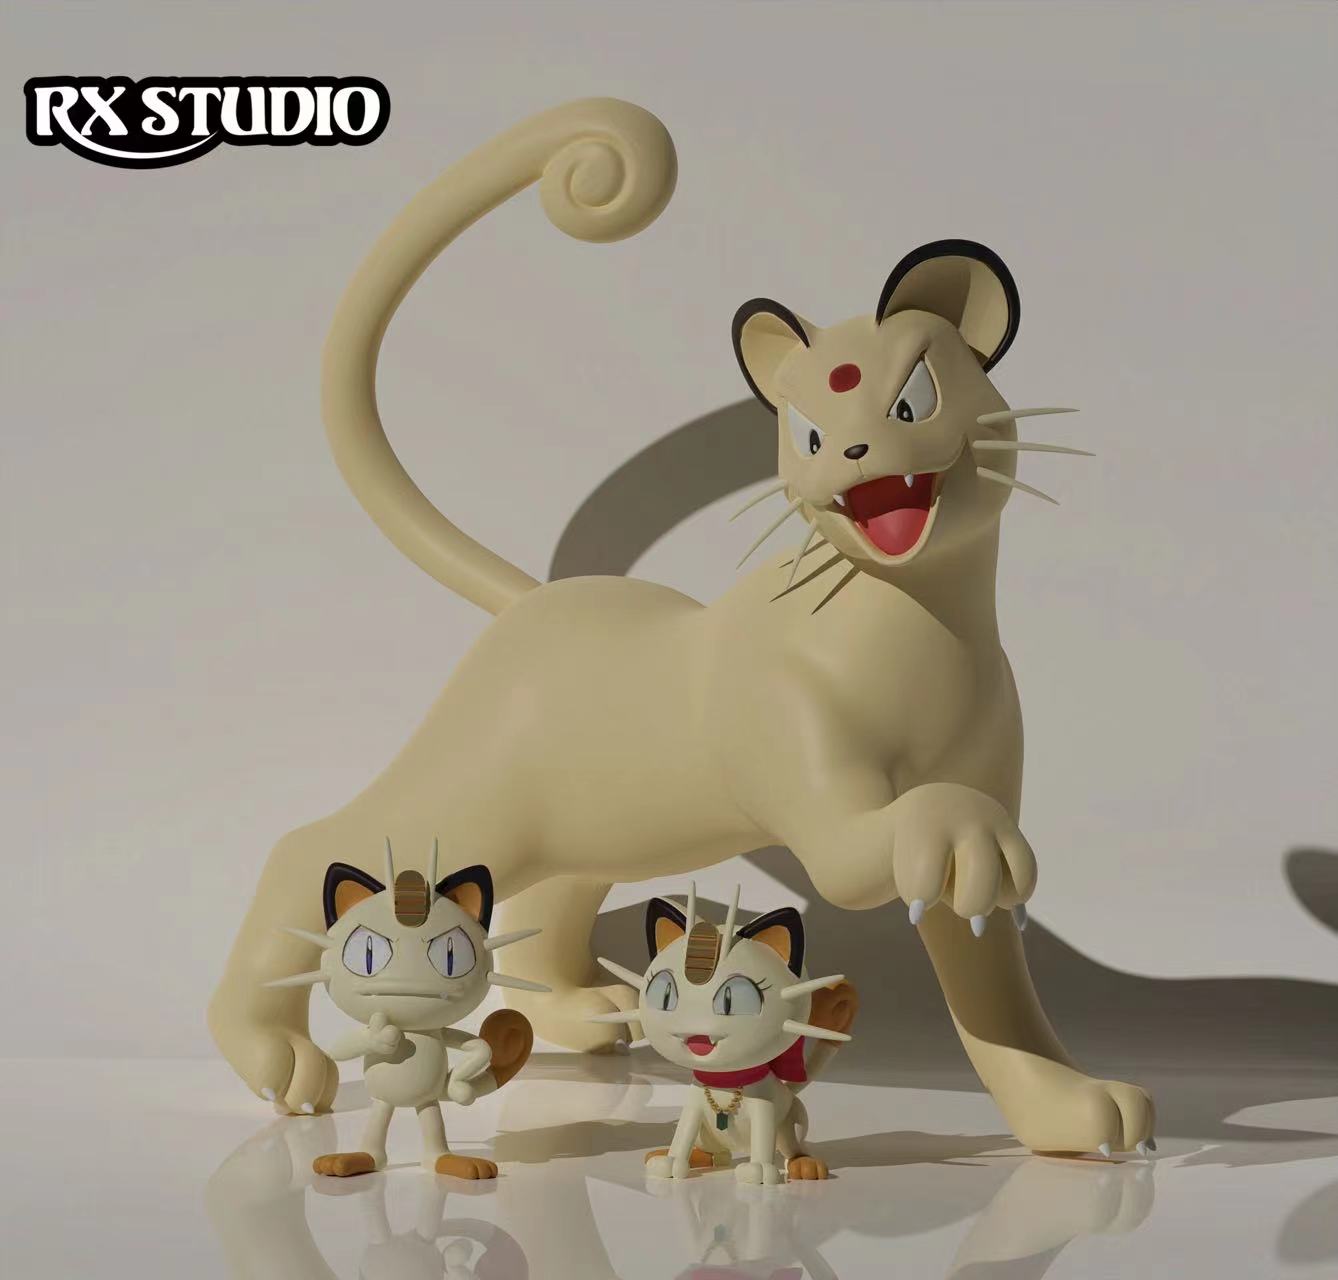 〖Sold Out〗Pokemon Scale World Meowth Persian #052 #053 1:20 - RX Studio